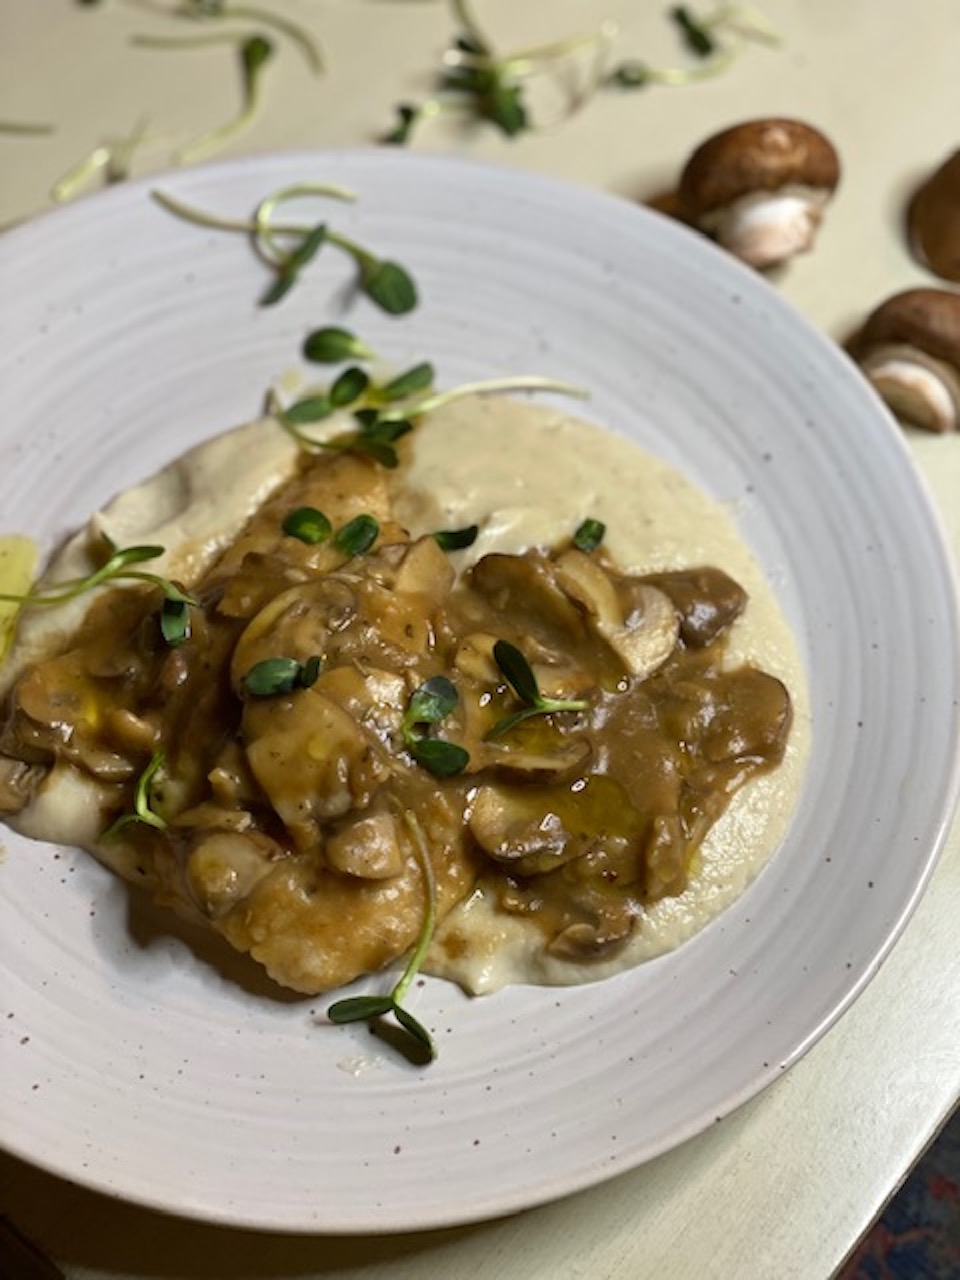 Skillet Chicken and Mushrooms with Roasted Sunchoke Puree